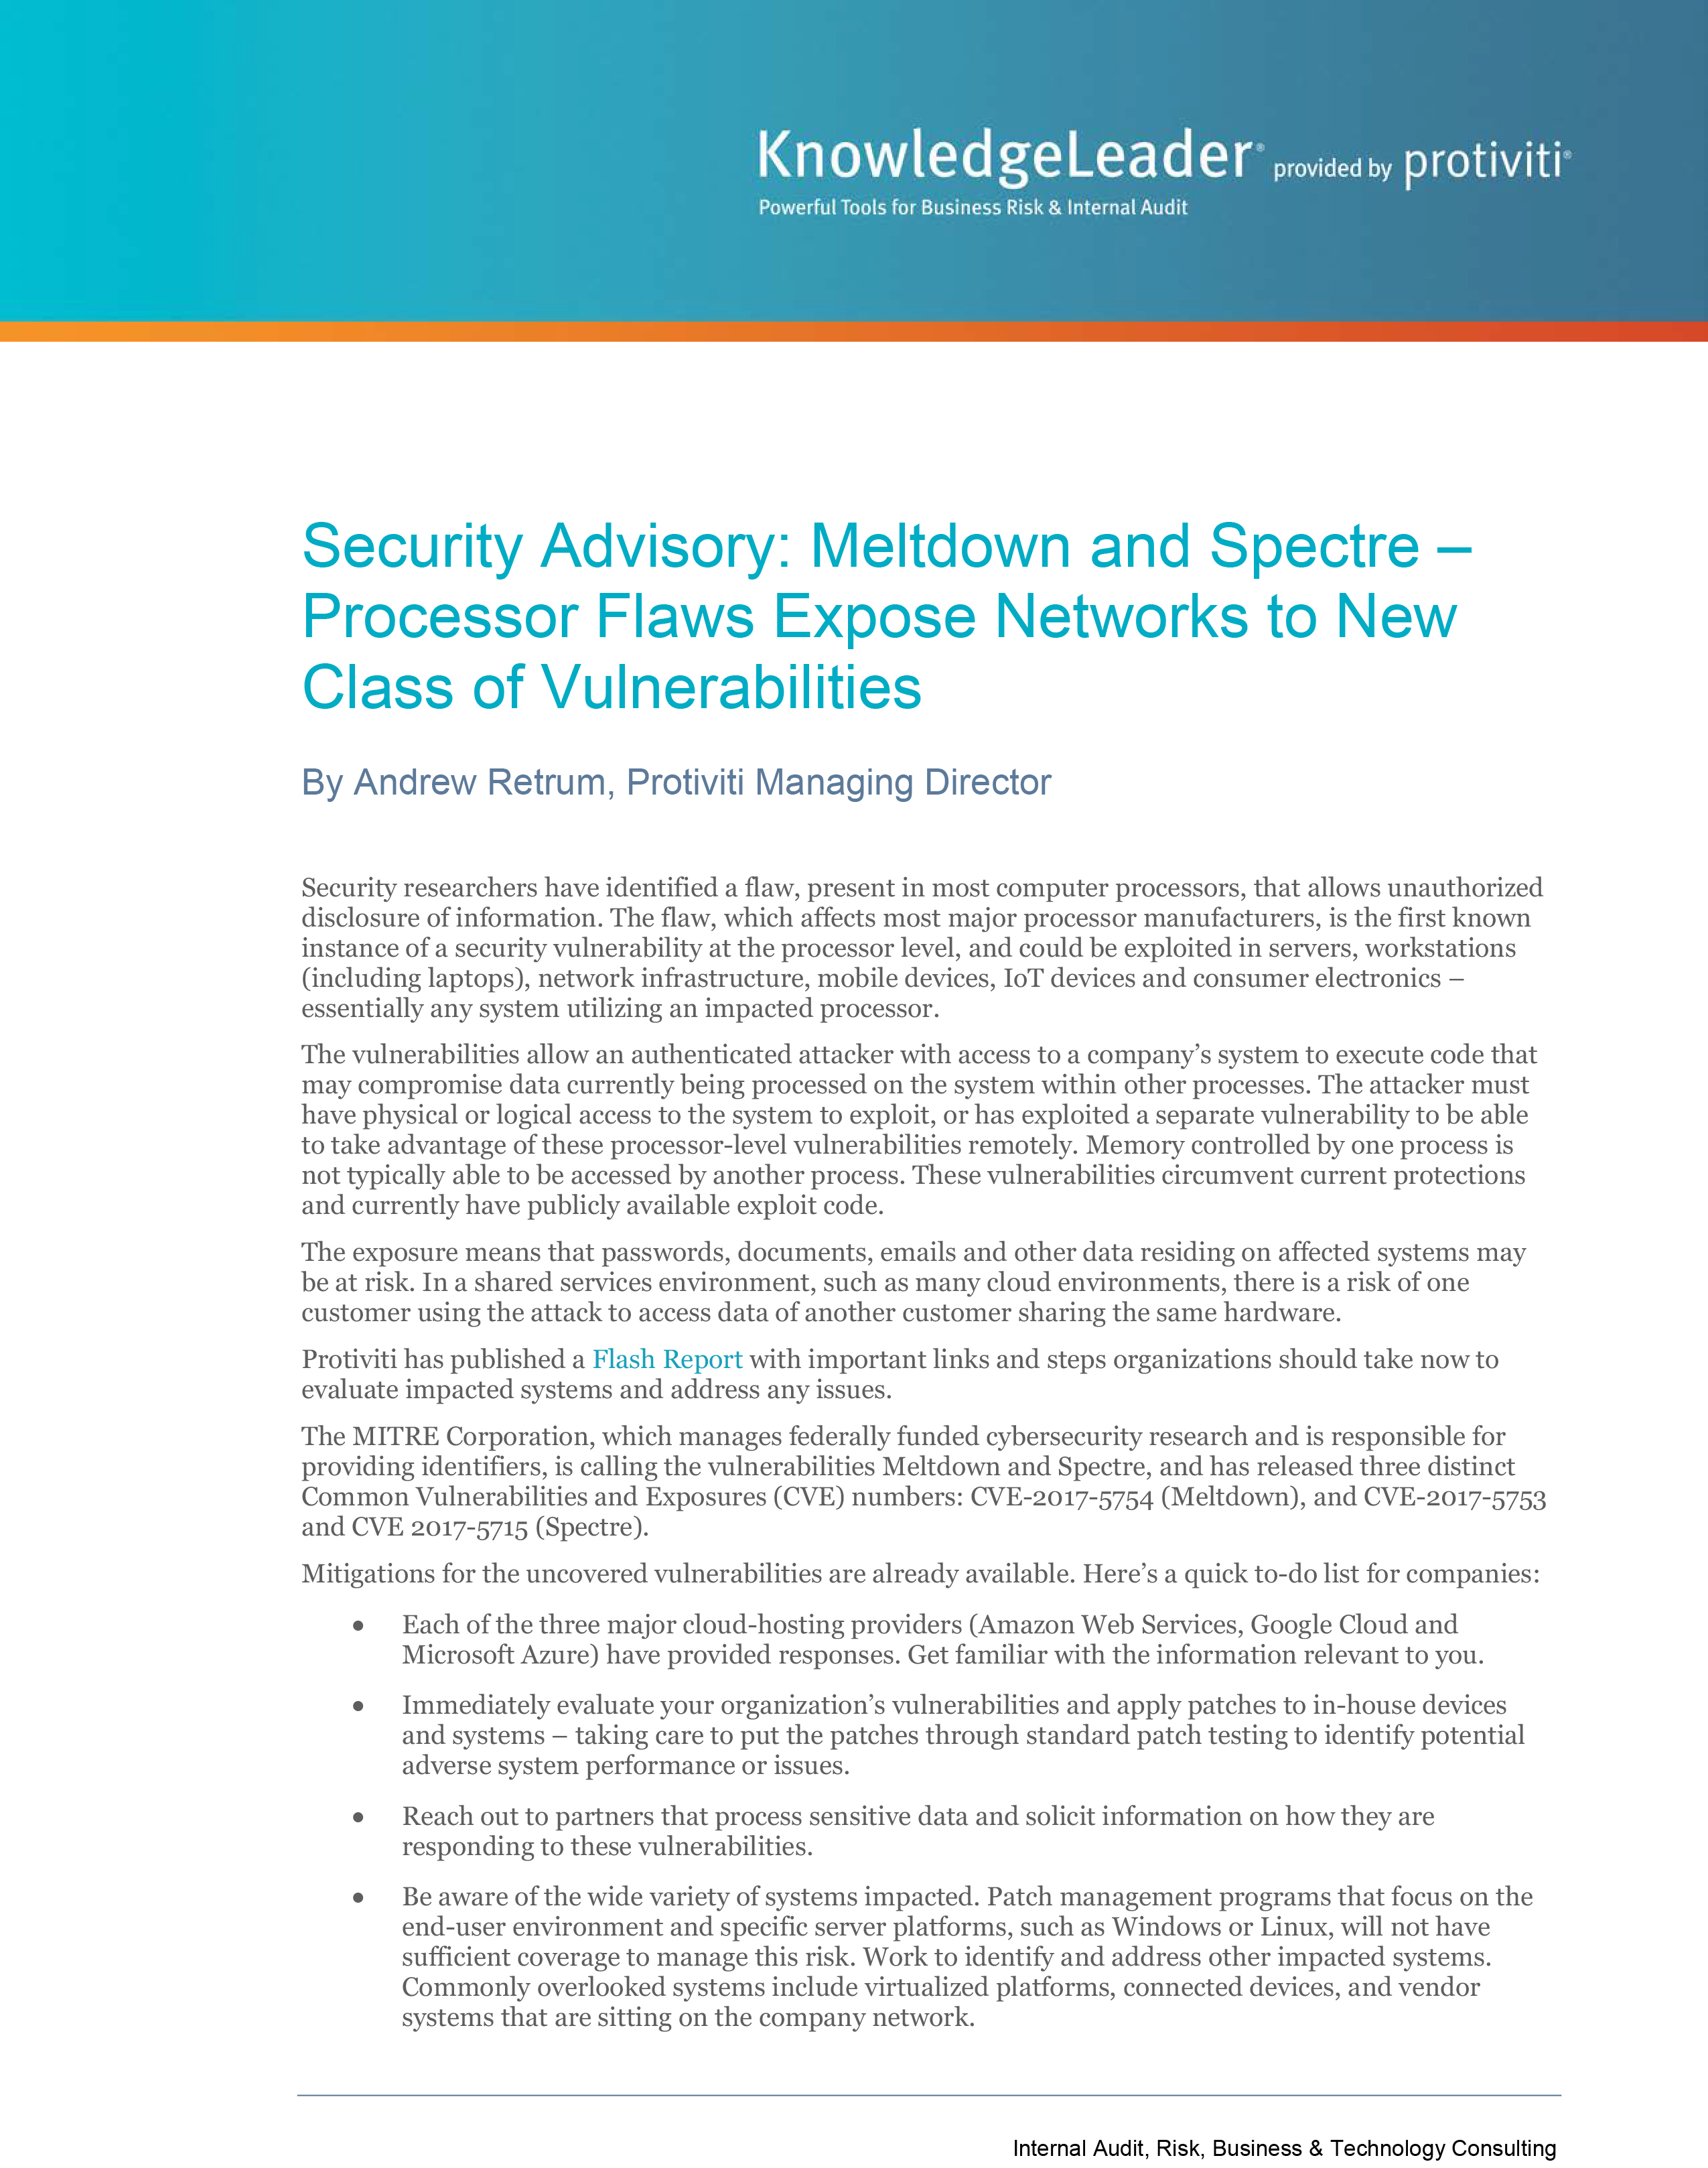 Screenshot of the first page of Security Advisory: Meltdown and Spectre – Processor Flaws Expose Networks to New Class of Vulnerabilities